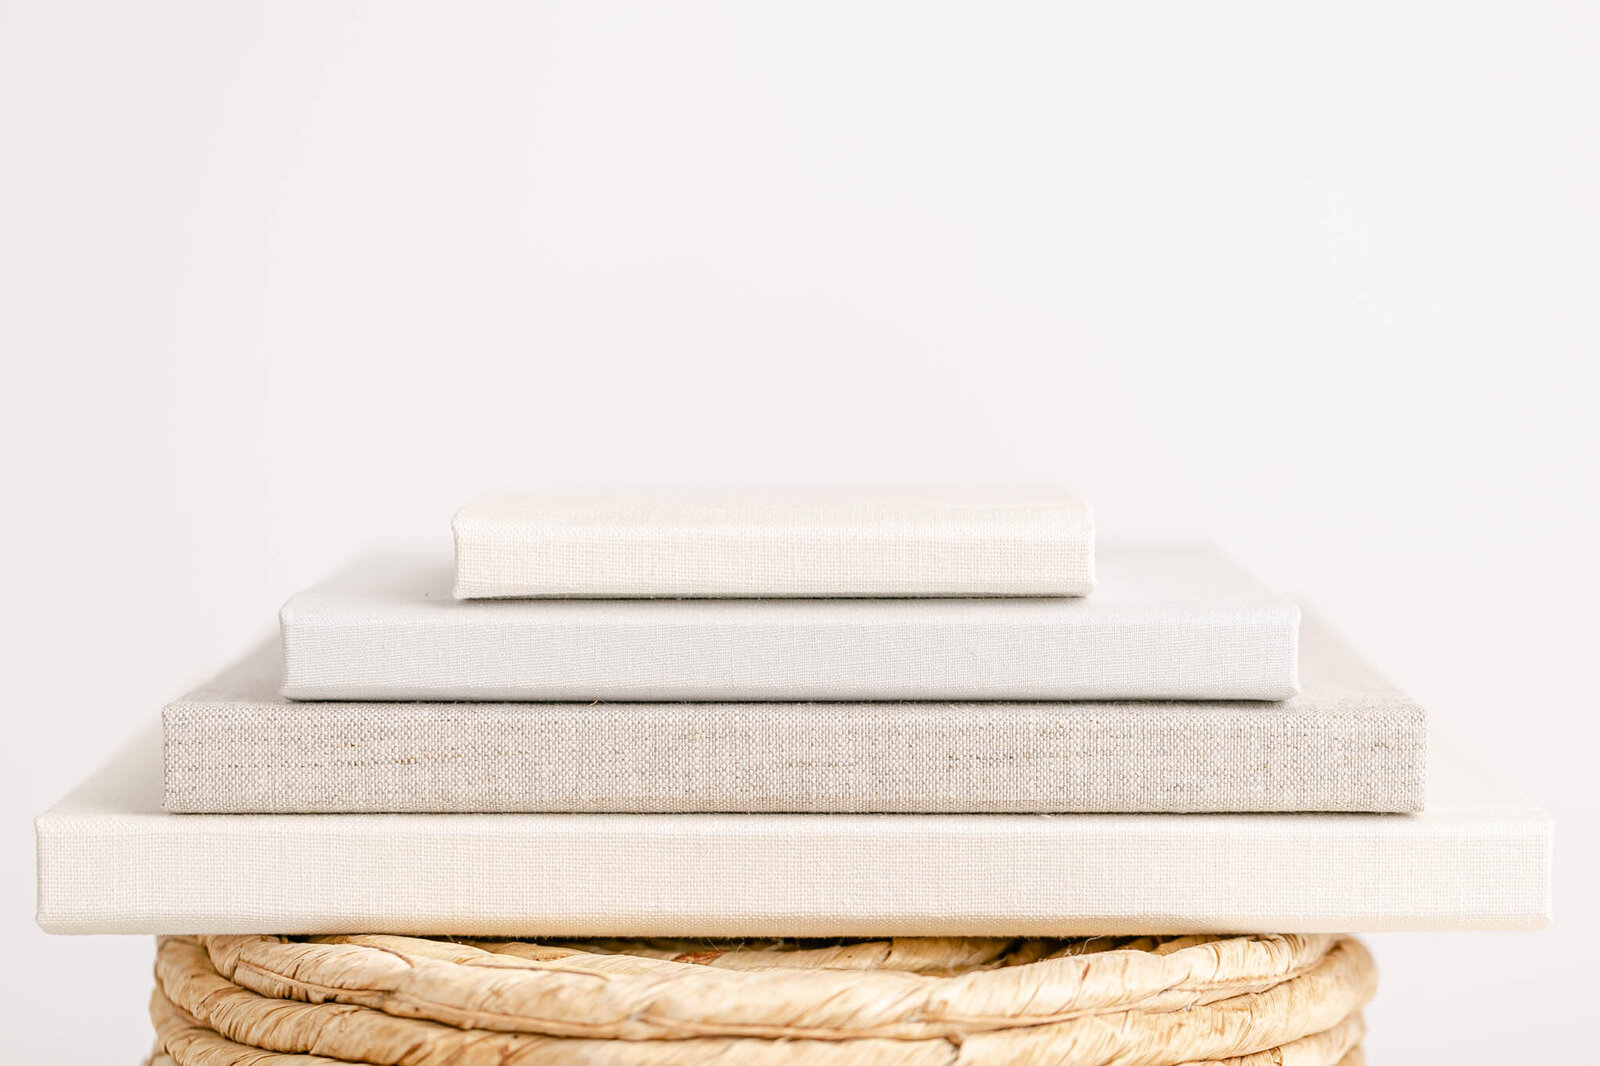 Stack of beautiful linen heirloom photo albums stacked on top of each other.